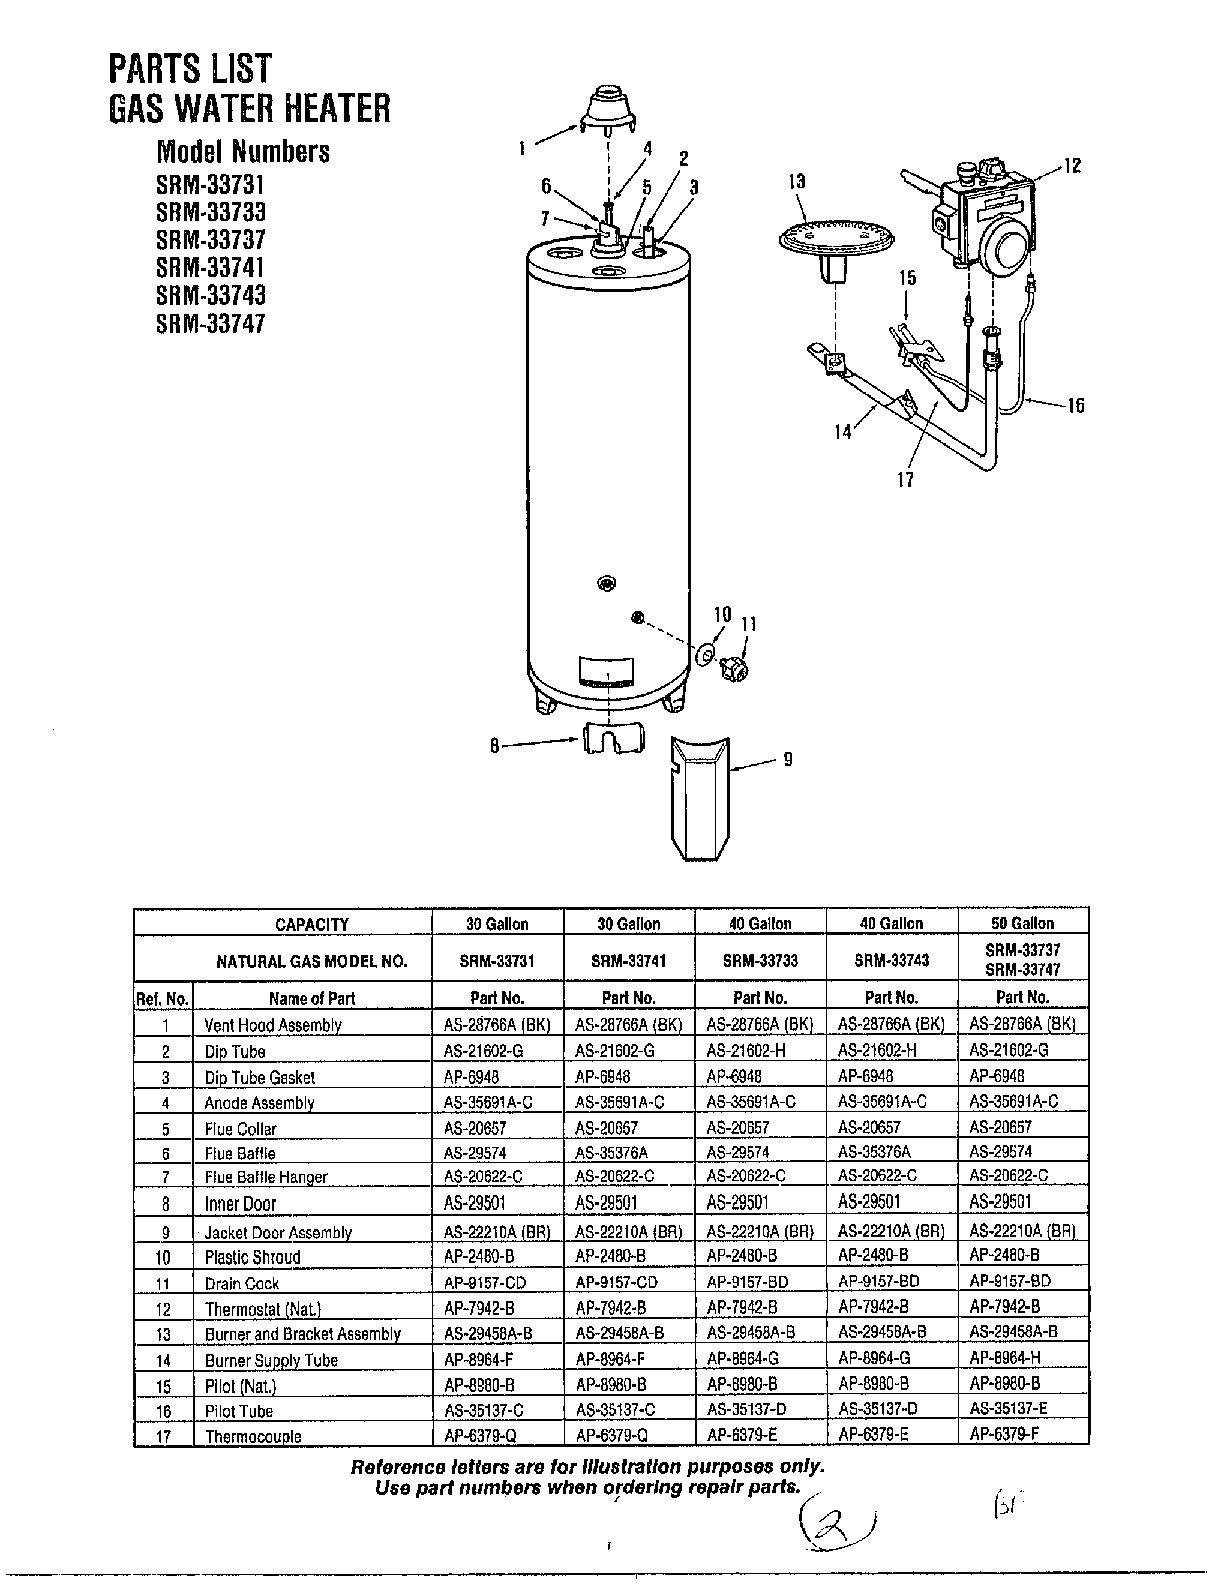 PARTS LIST-GAS WATER HEATER Page 2 Diagram & Parts List for Model 33831 ...